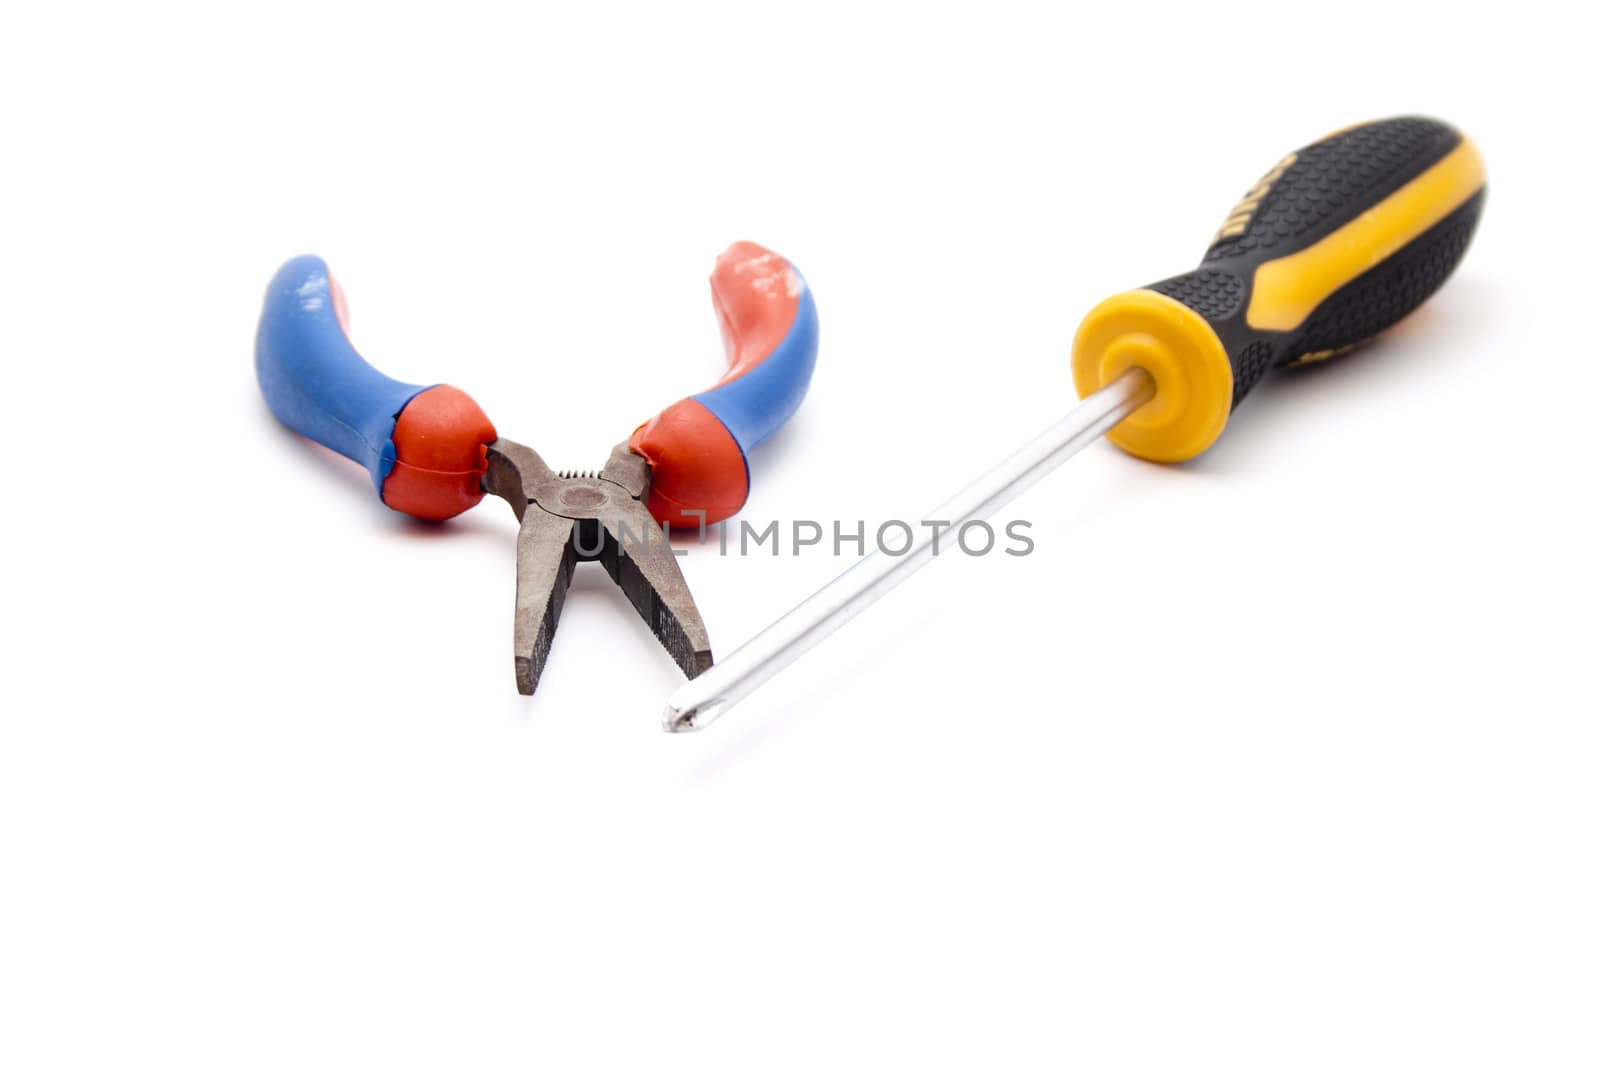 Tong with Screwdriver on white background